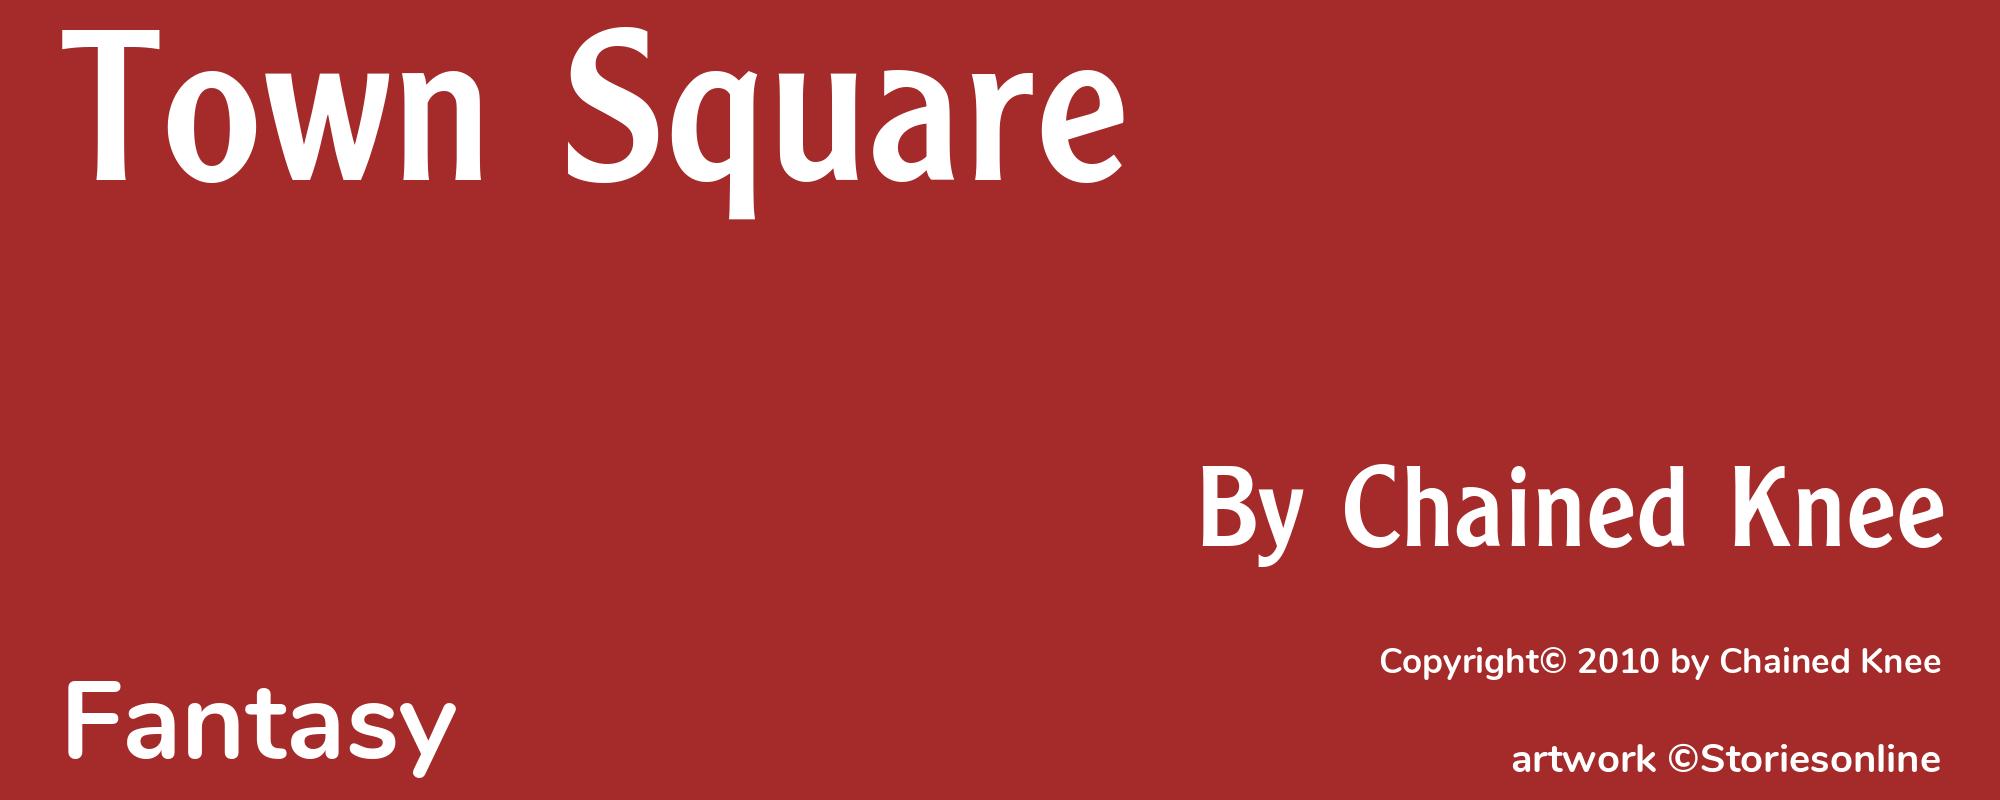 Town Square - Cover